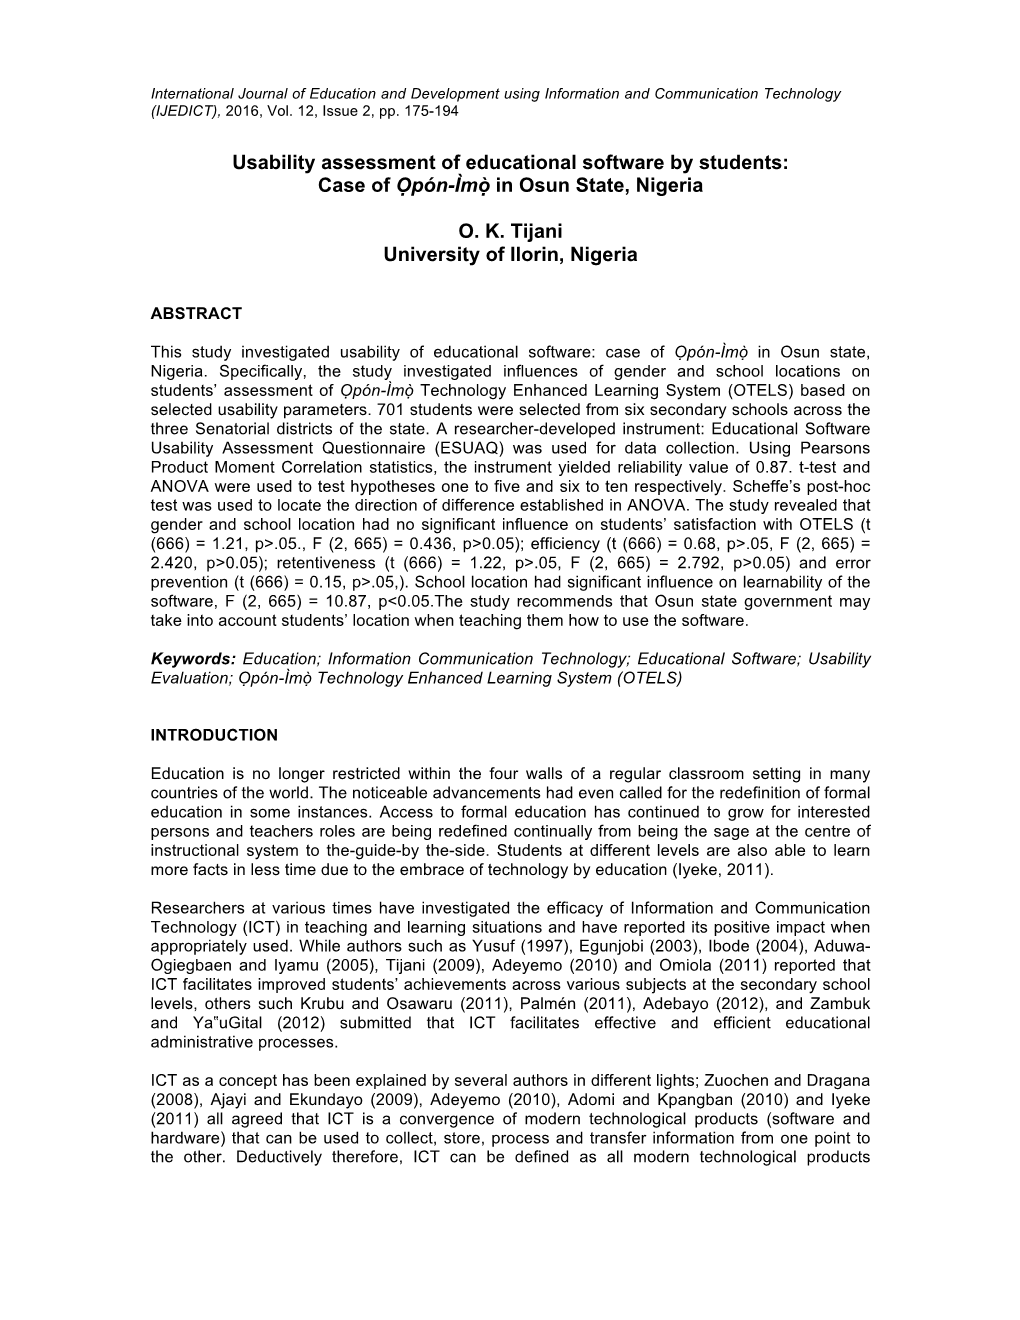 Usability Assessment of Educational Software by Students: Case of Ọpón-Ìmọ̀ in Osun State, Nigeria